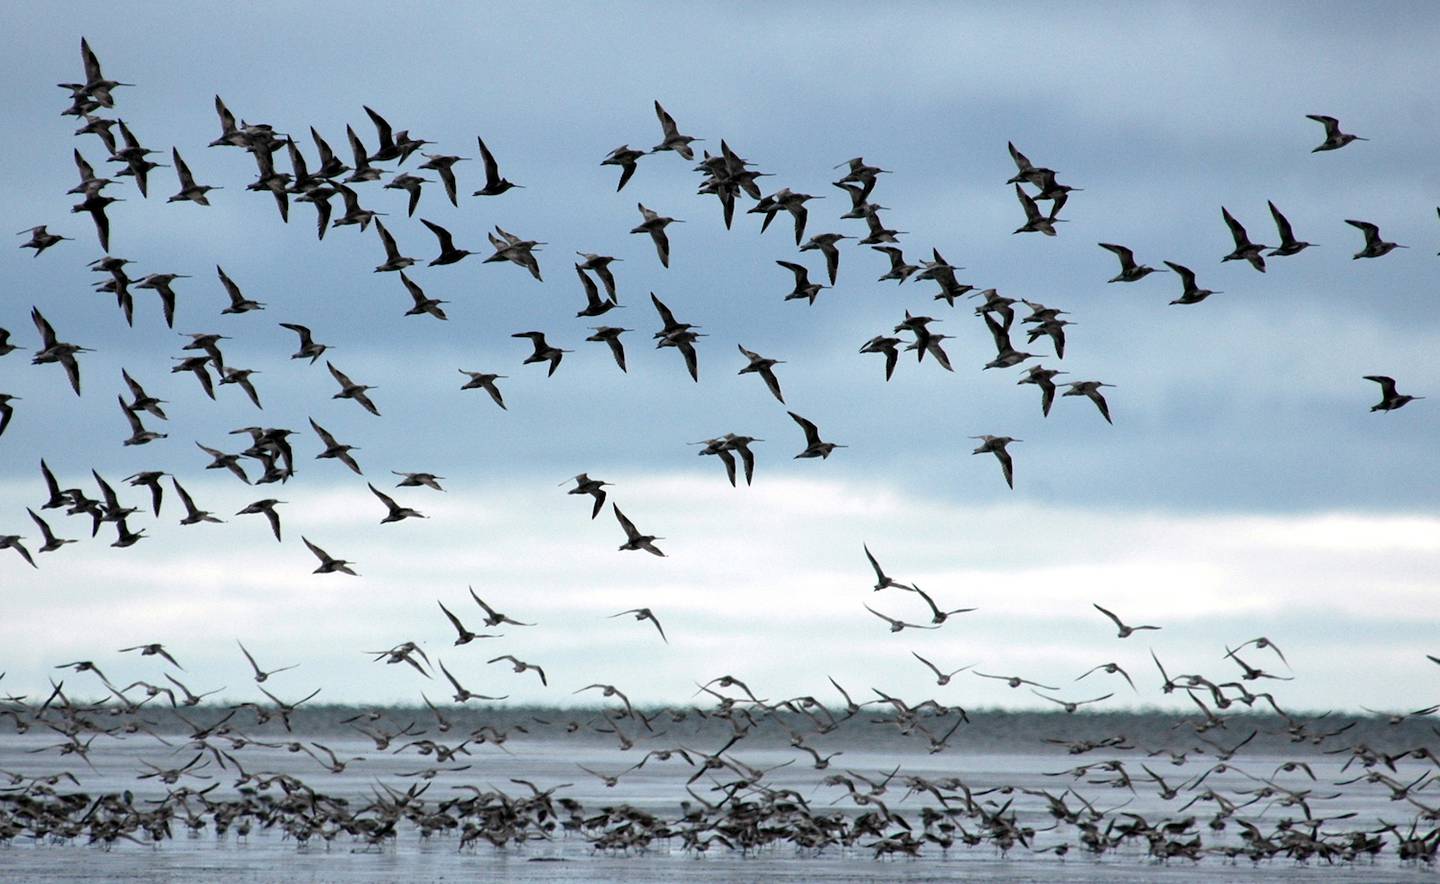 Bar-tailed godwits at a favorite fall staging spot in Alaska